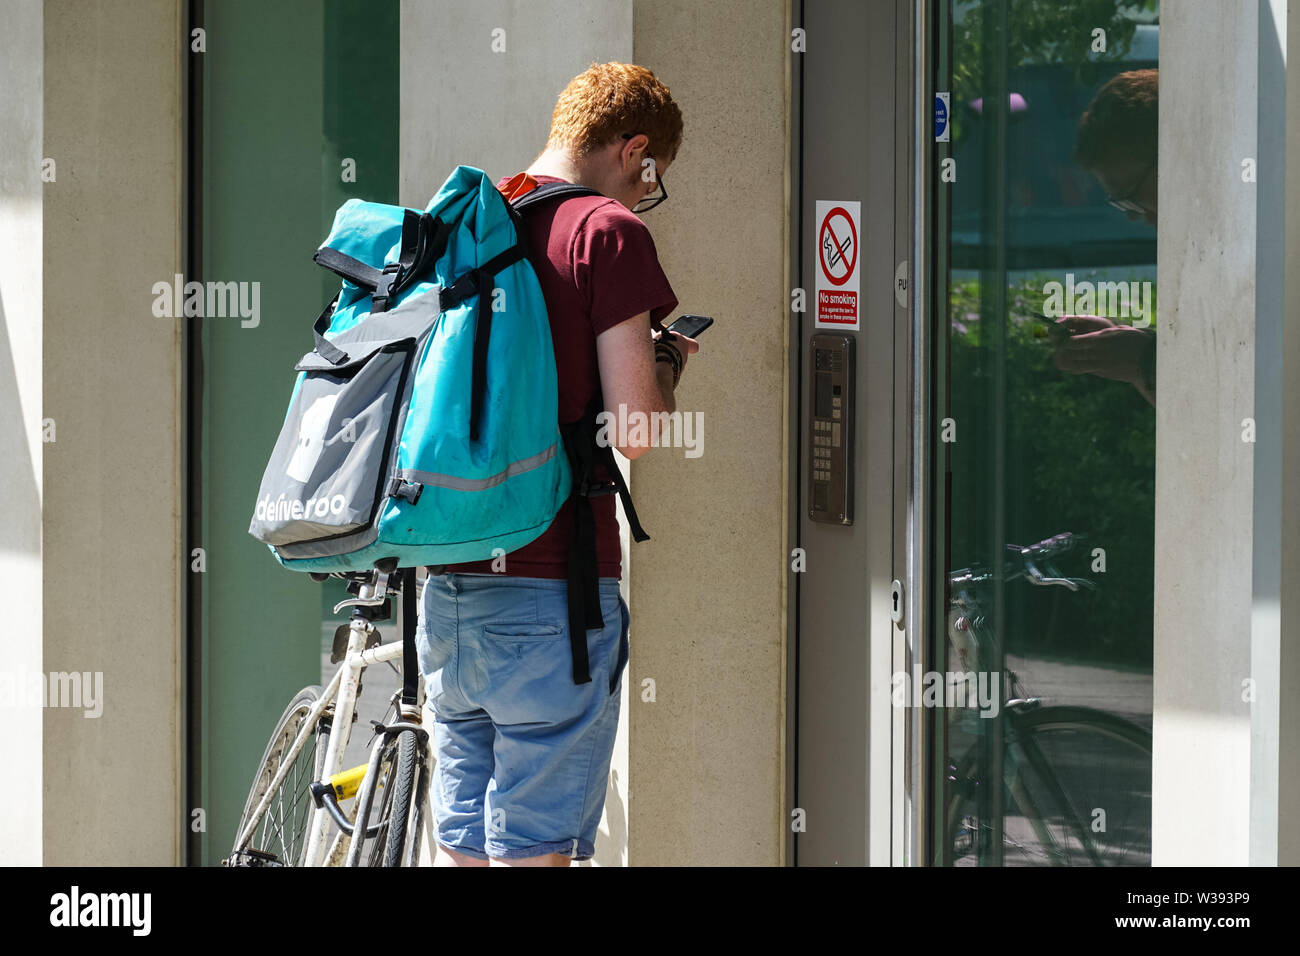 Deliveroo delivery man at the door, London England United Kingdom UK Stock Photo